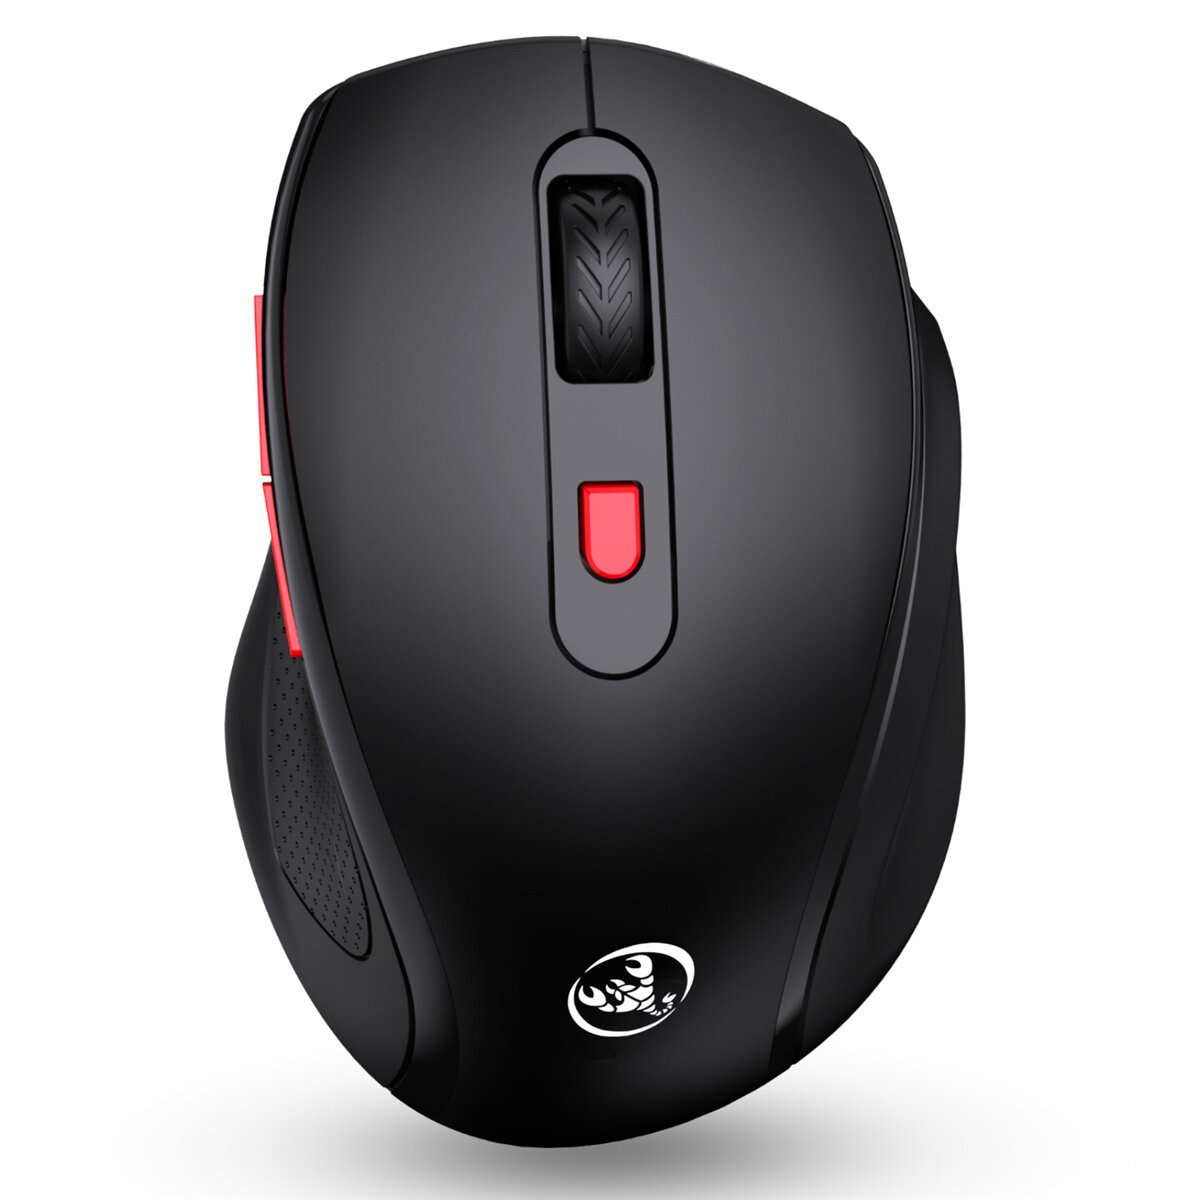 HXSJ T67 Wireless bluetooth Mouse Dual Mode BT3.0/5.0 Optical Mouse 1600DPI Gaming Mouse for Desktop